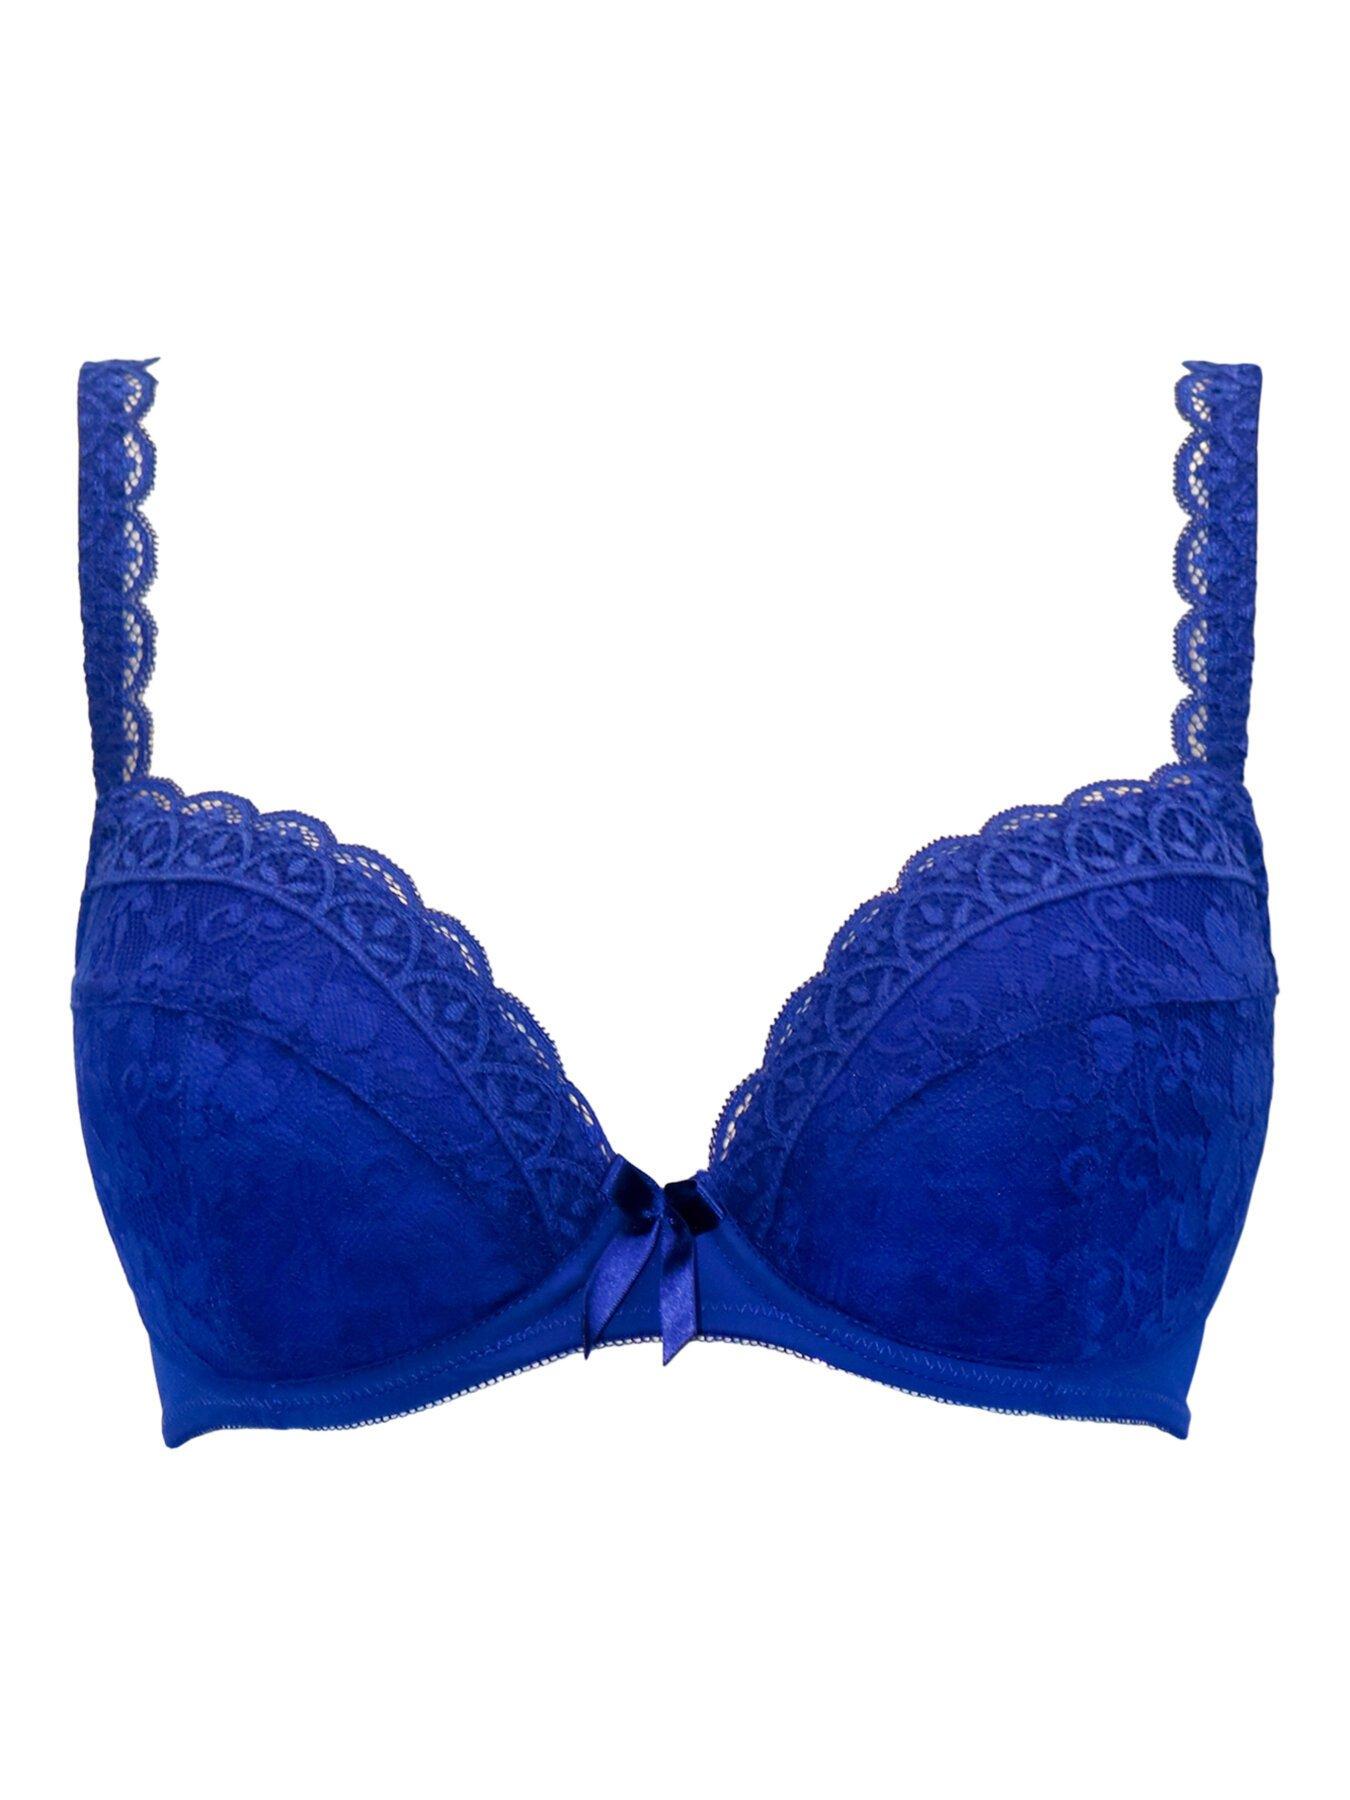 victoria secret royal blue laced back push up bra [34a], Women's Fashion,  New Undergarments & Loungewear on Carousell